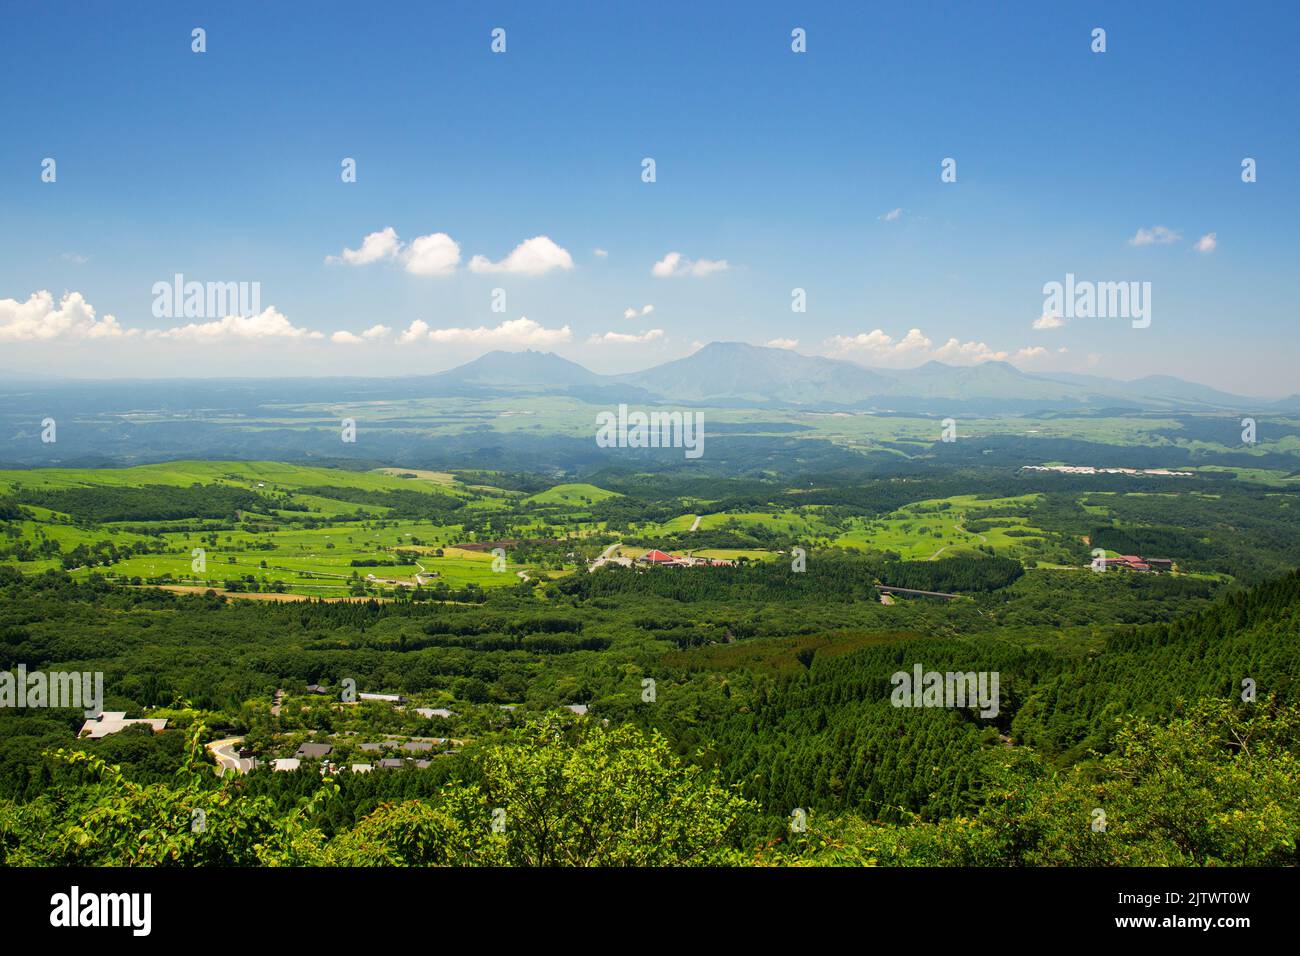 Grassland in Aso, view from Yamanami Highway, Kumamoto Prefecture, Japan Stock Photo